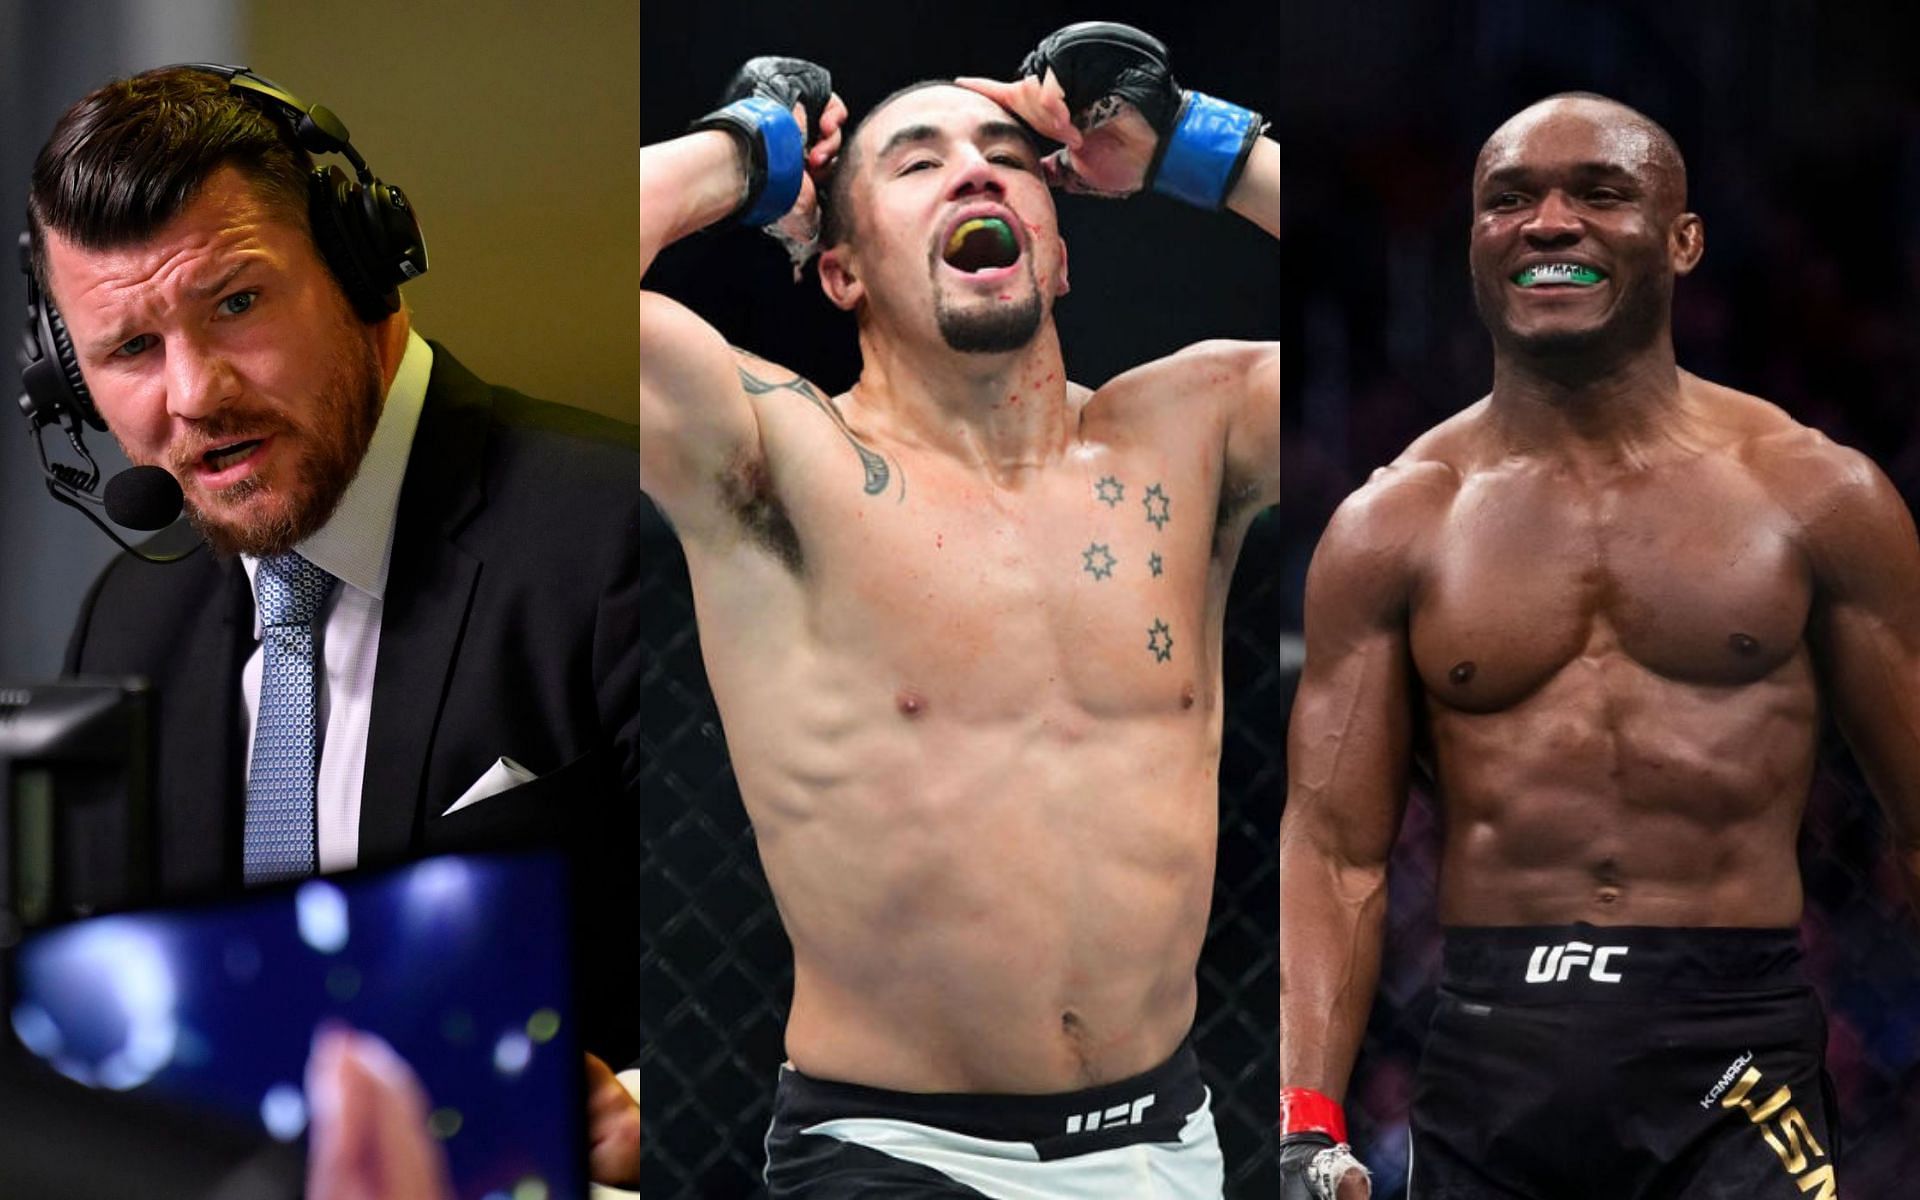 “Usman needs fresh meat” – Michael Bisping suggests Robert Whittaker should return to welterweight and fight Kamaru Usman